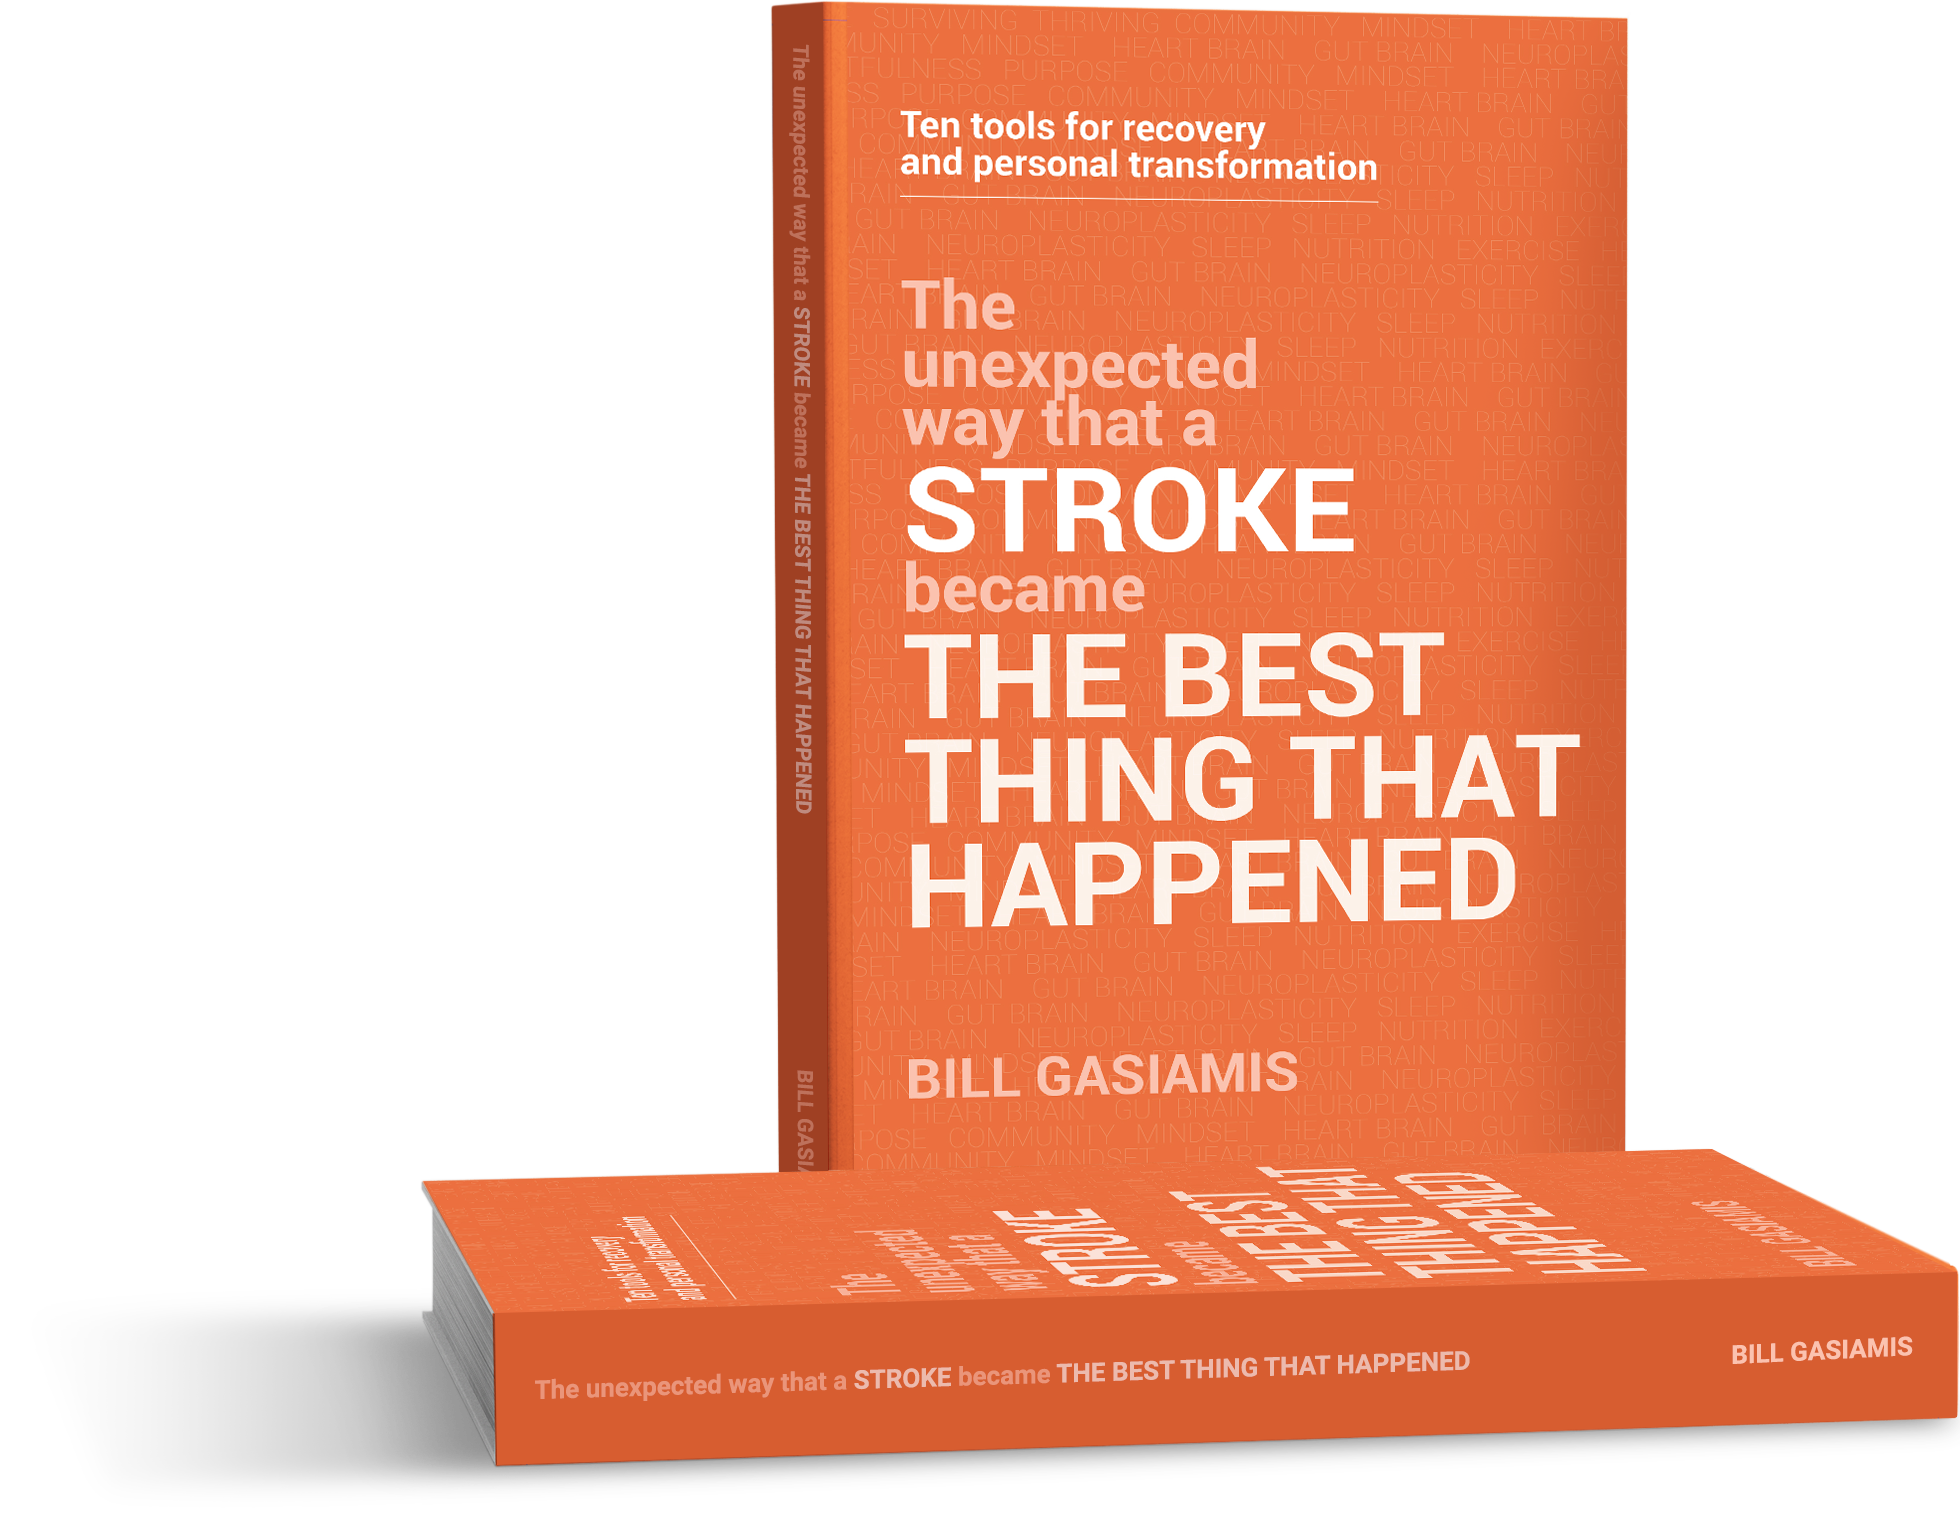 The unexpected way that a stroke became the best thing that happened to me